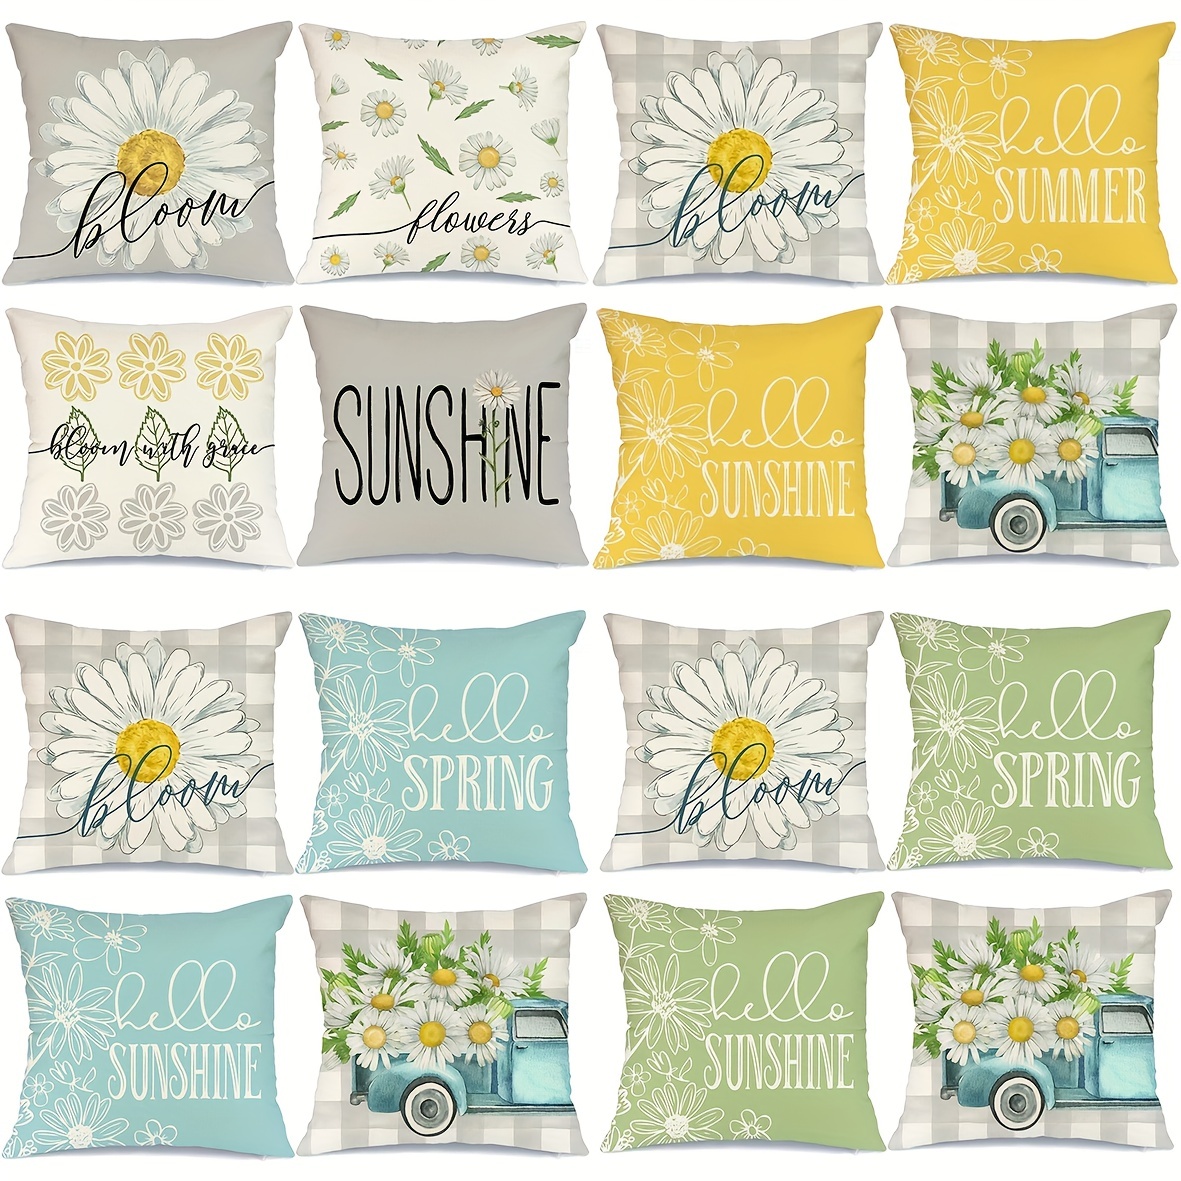 

4pcs/set Daisy Flower Printed Throw Pillow Covers For Outdoor Farmhouse Living Room Furniture - 18x18 Inches